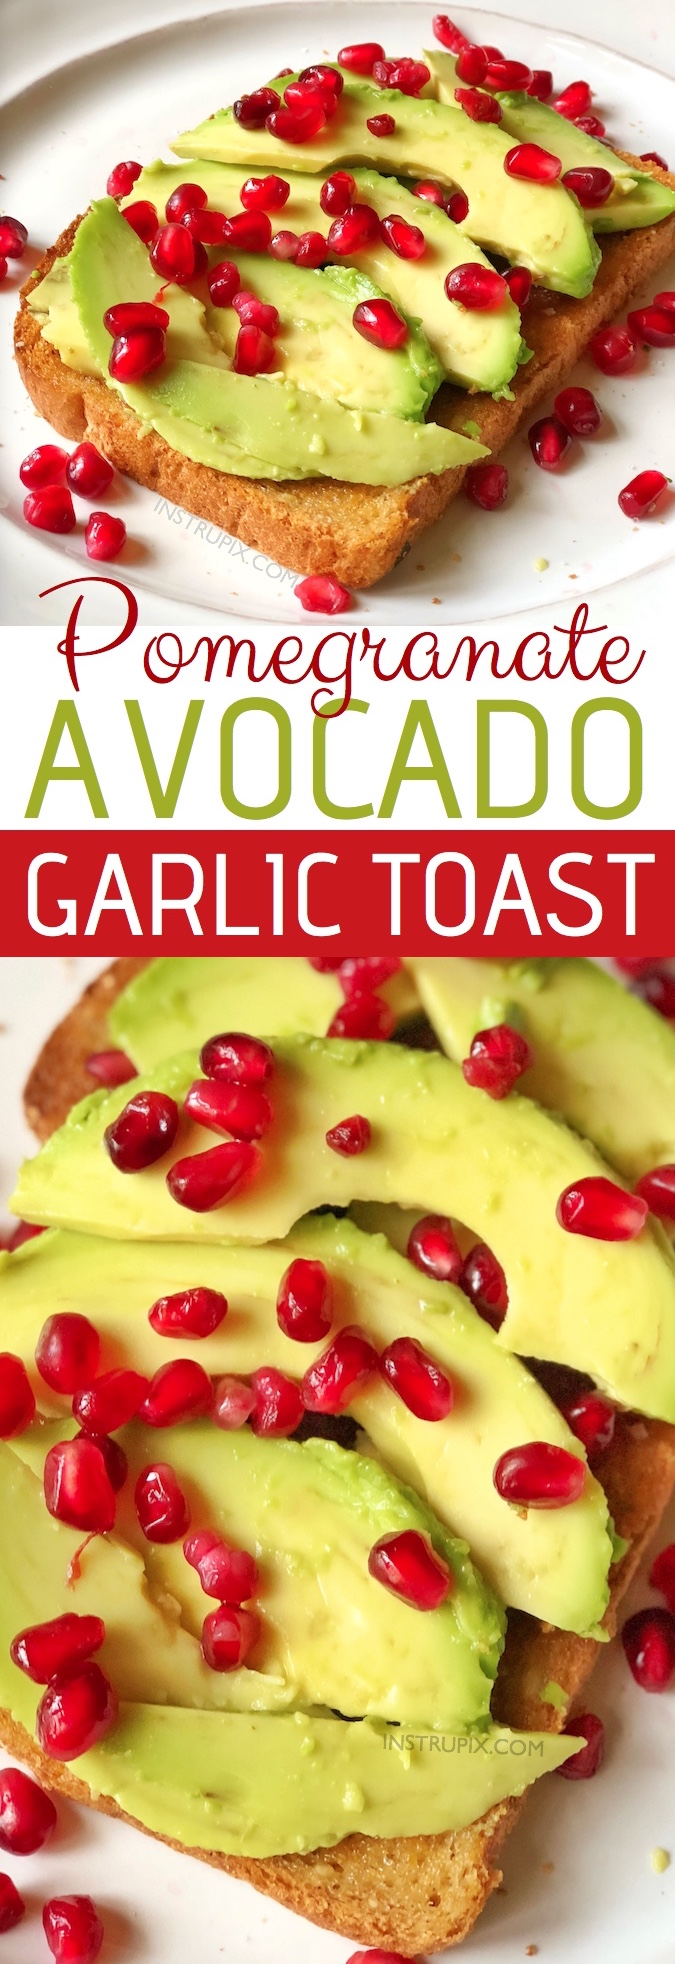 Winter Breakfast Idea! Simple Healthy Avocado Toast Breakfast Recipe made with pomegranate seeds! This is also delicious for lunch or a mid day snack. Healthy pomegranate recipe. Perfect for Christmas and holidays! Even the kids will love this. Instrupix.com 